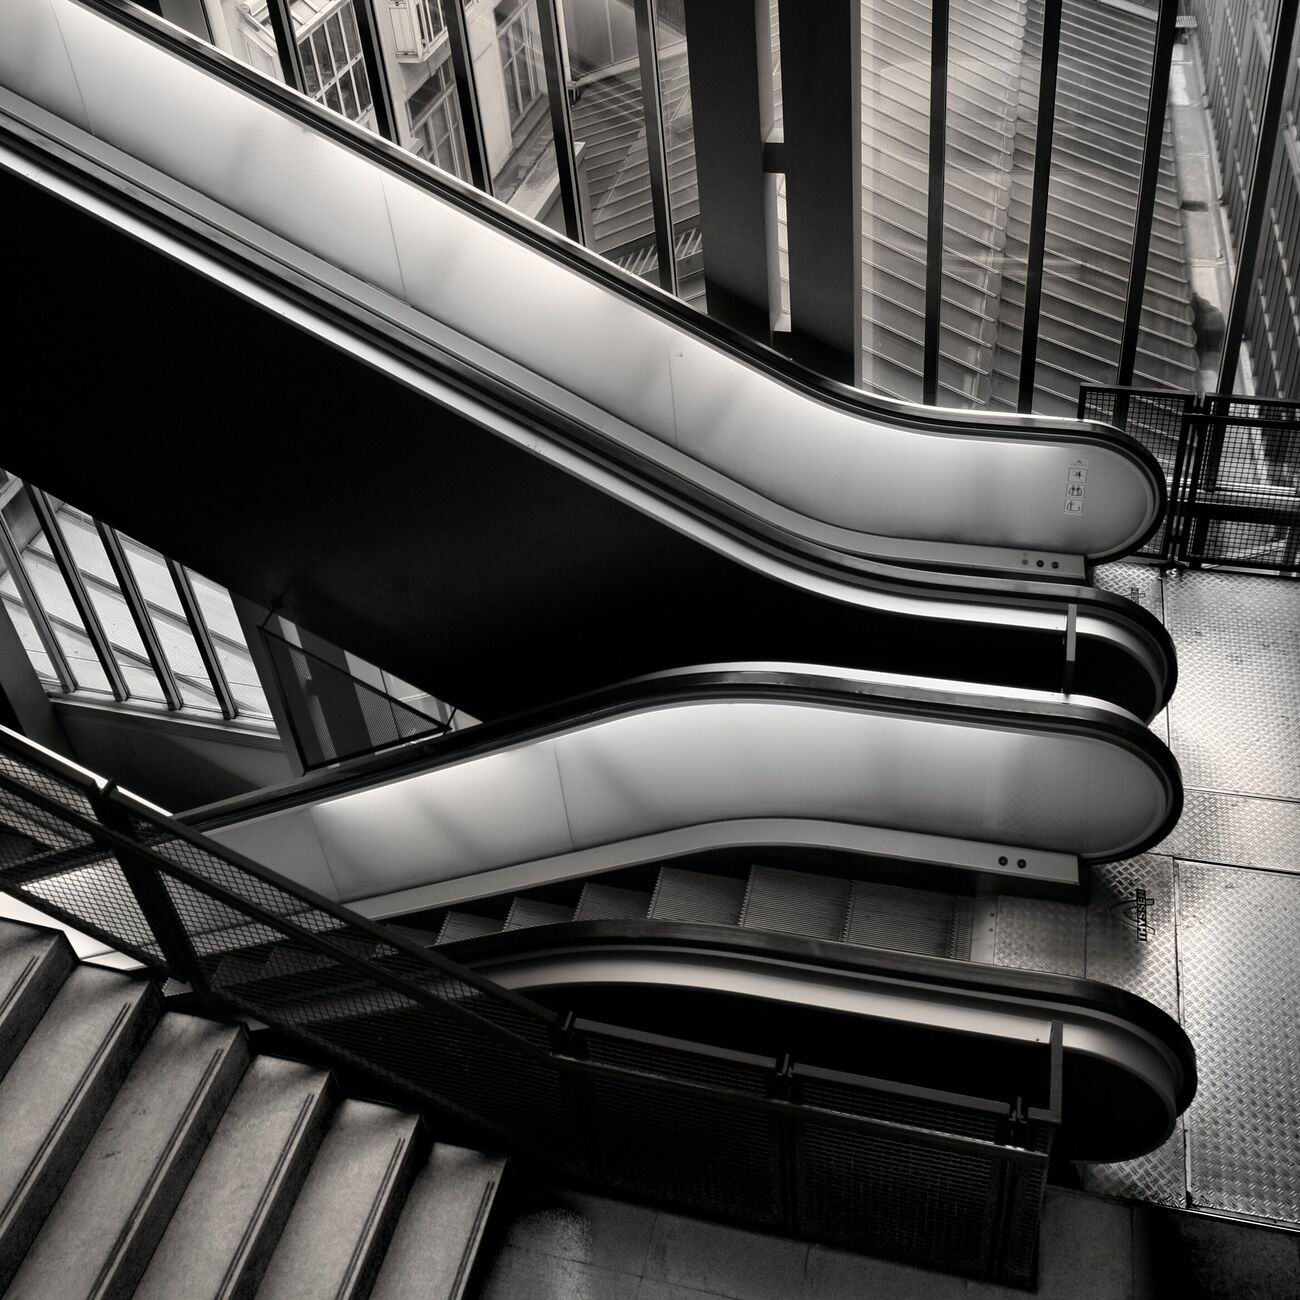 Photograph print 7.1 x 7.1 in, Orsay museum escalator. Ref-564-23 - Denis Olivier Art Photography